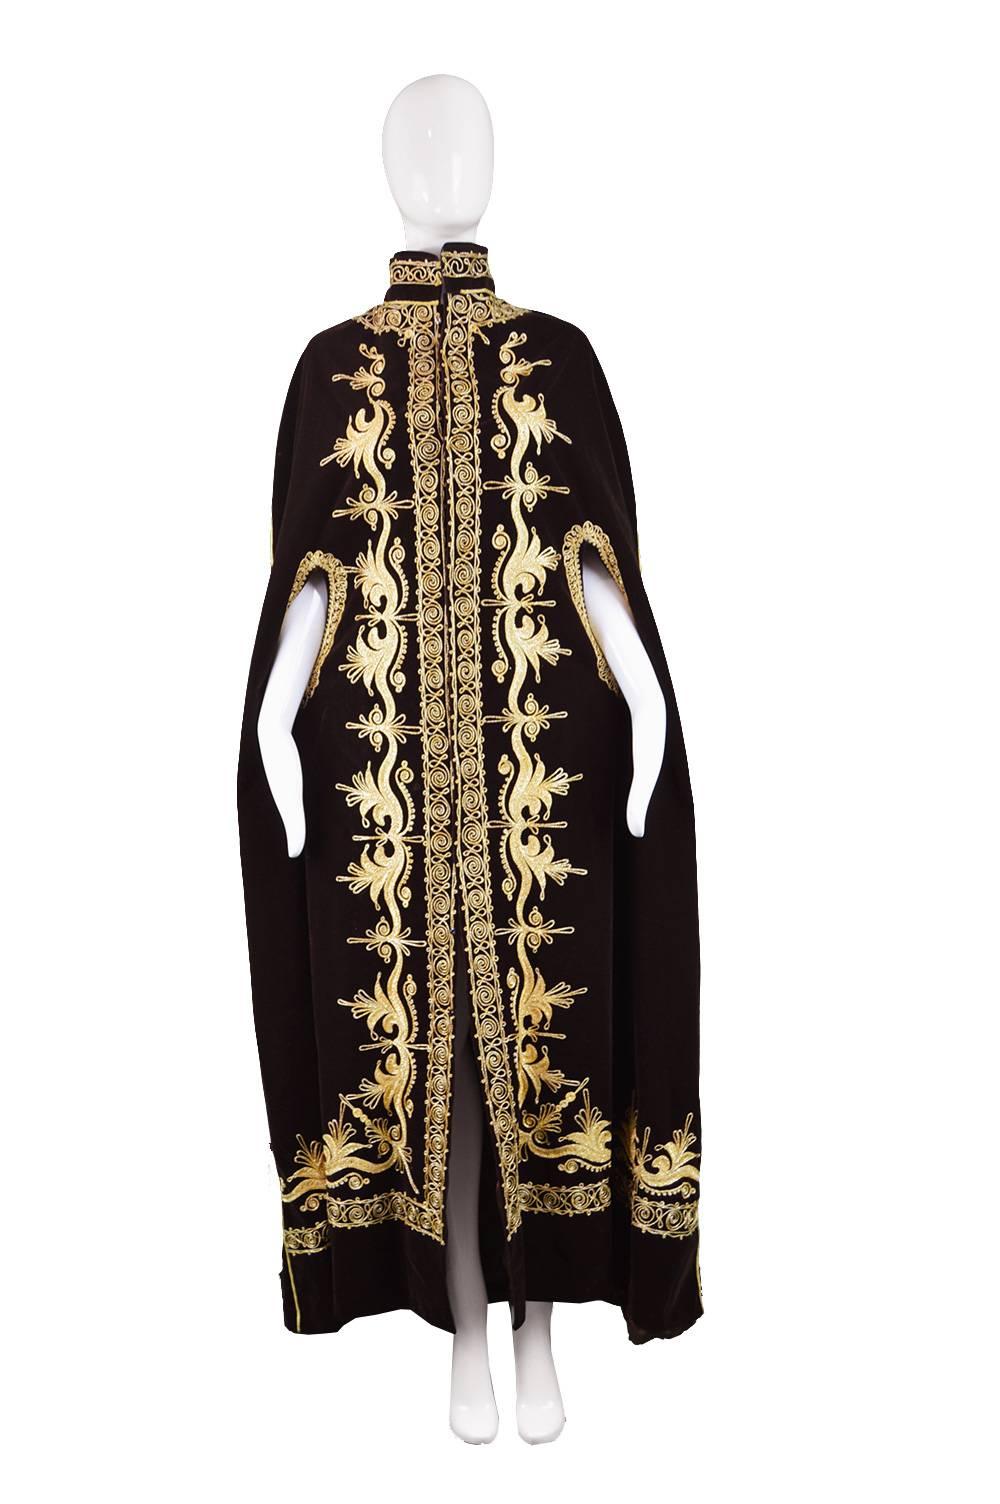 A dramatic women's vintage maxi cloak from the 70s in a brown short-pile velvet with intricate gold embroidery creating a hippy or bohemian luxe aesthetic. With poppers to fasten the front this looks stunning worn like an opera coat over an evening